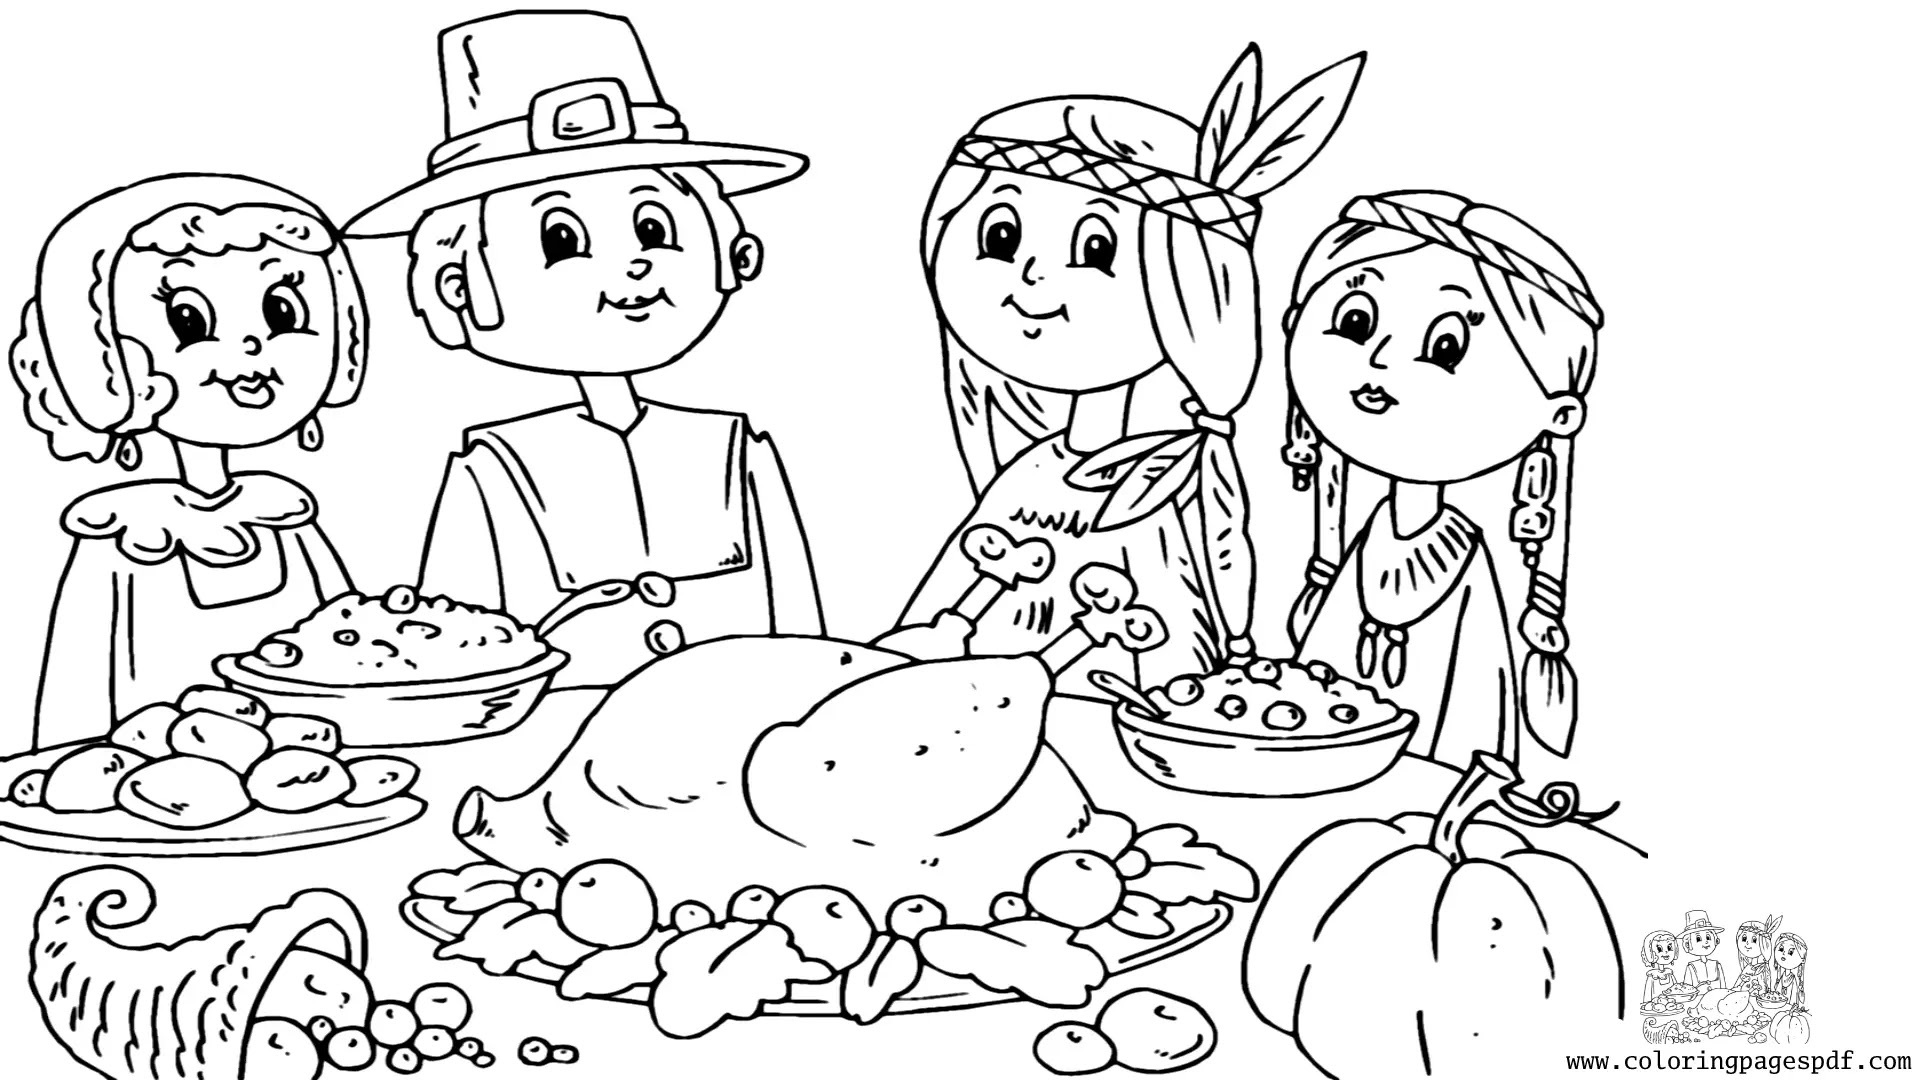 Coloring Page Of A Family Enjoying Thanksgiving